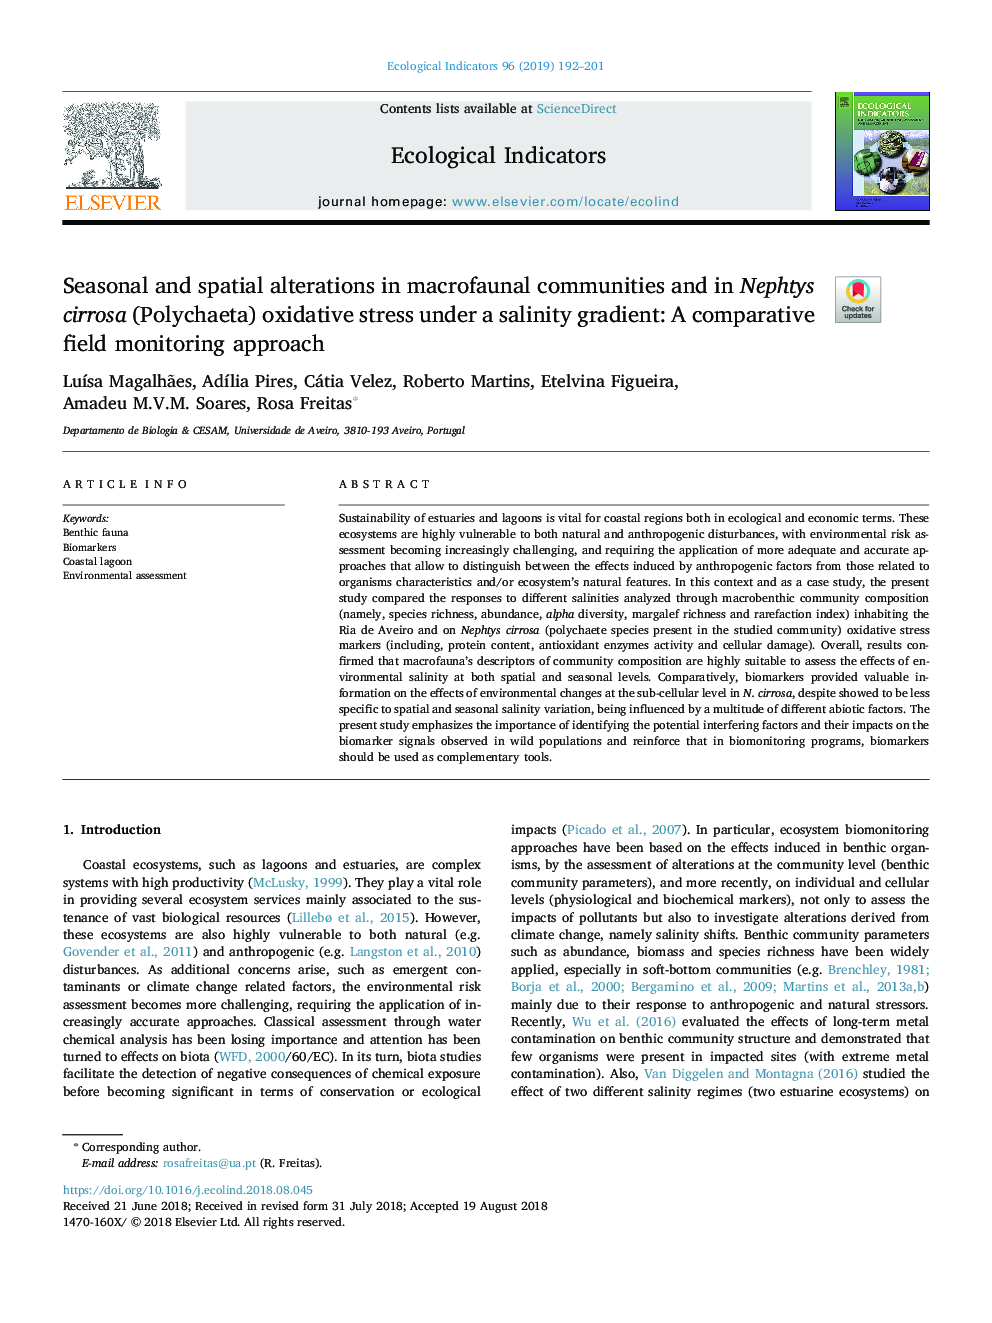 Seasonal and spatial alterations in macrofaunal communities and in Nephtys cirrosa (Polychaeta) oxidative stress under a salinity gradient: A comparative field monitoring approach